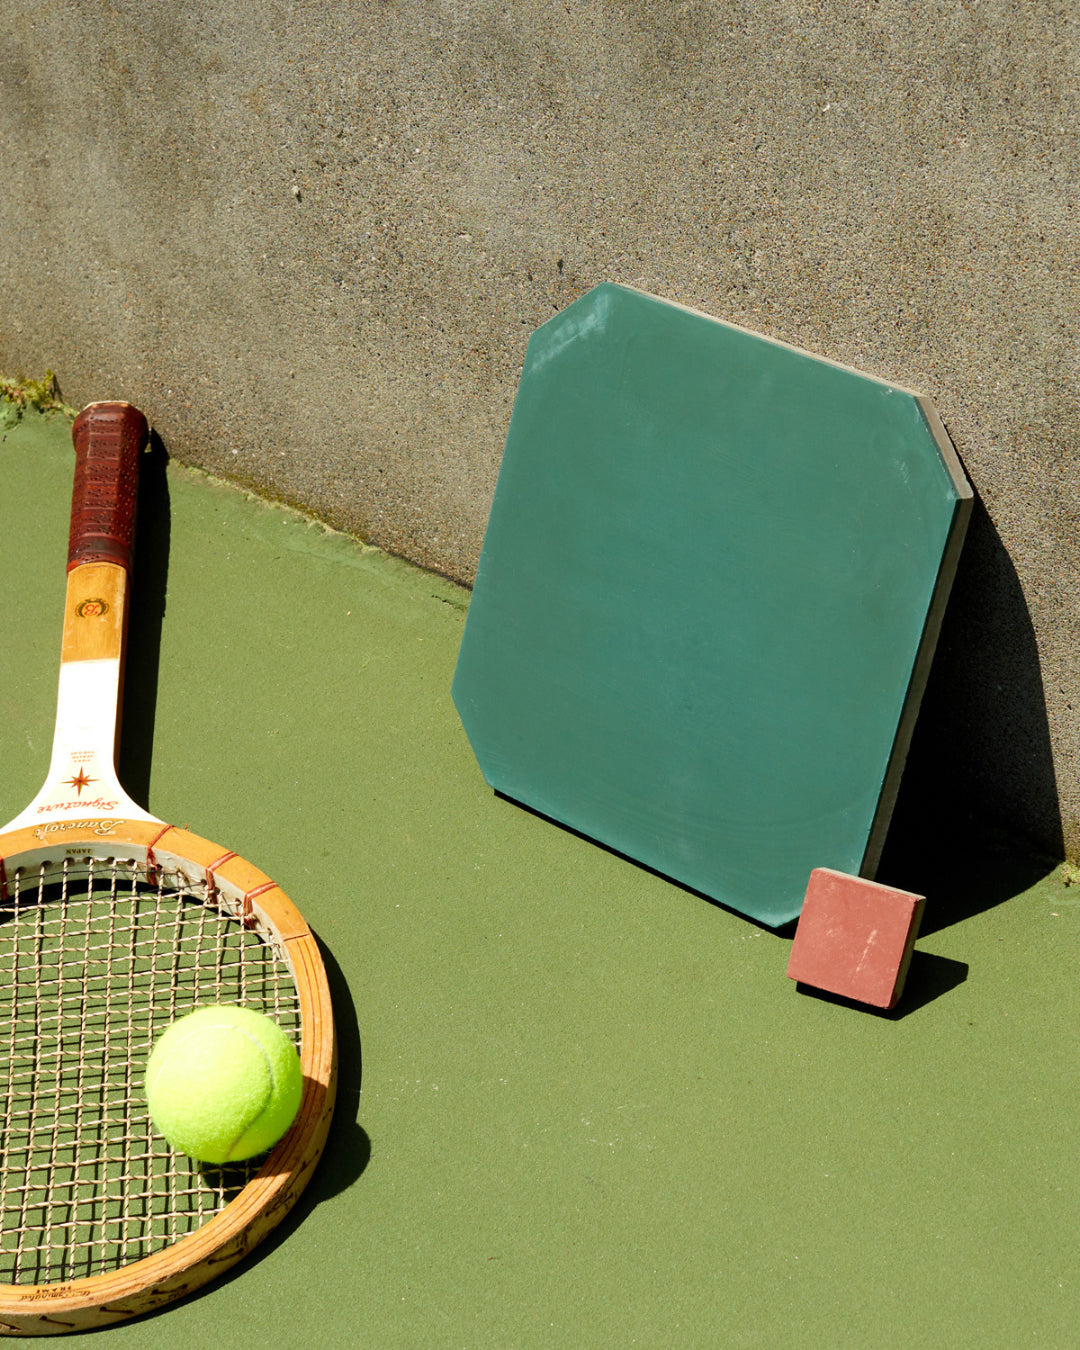 Concrete tiles styled on a tennis court.